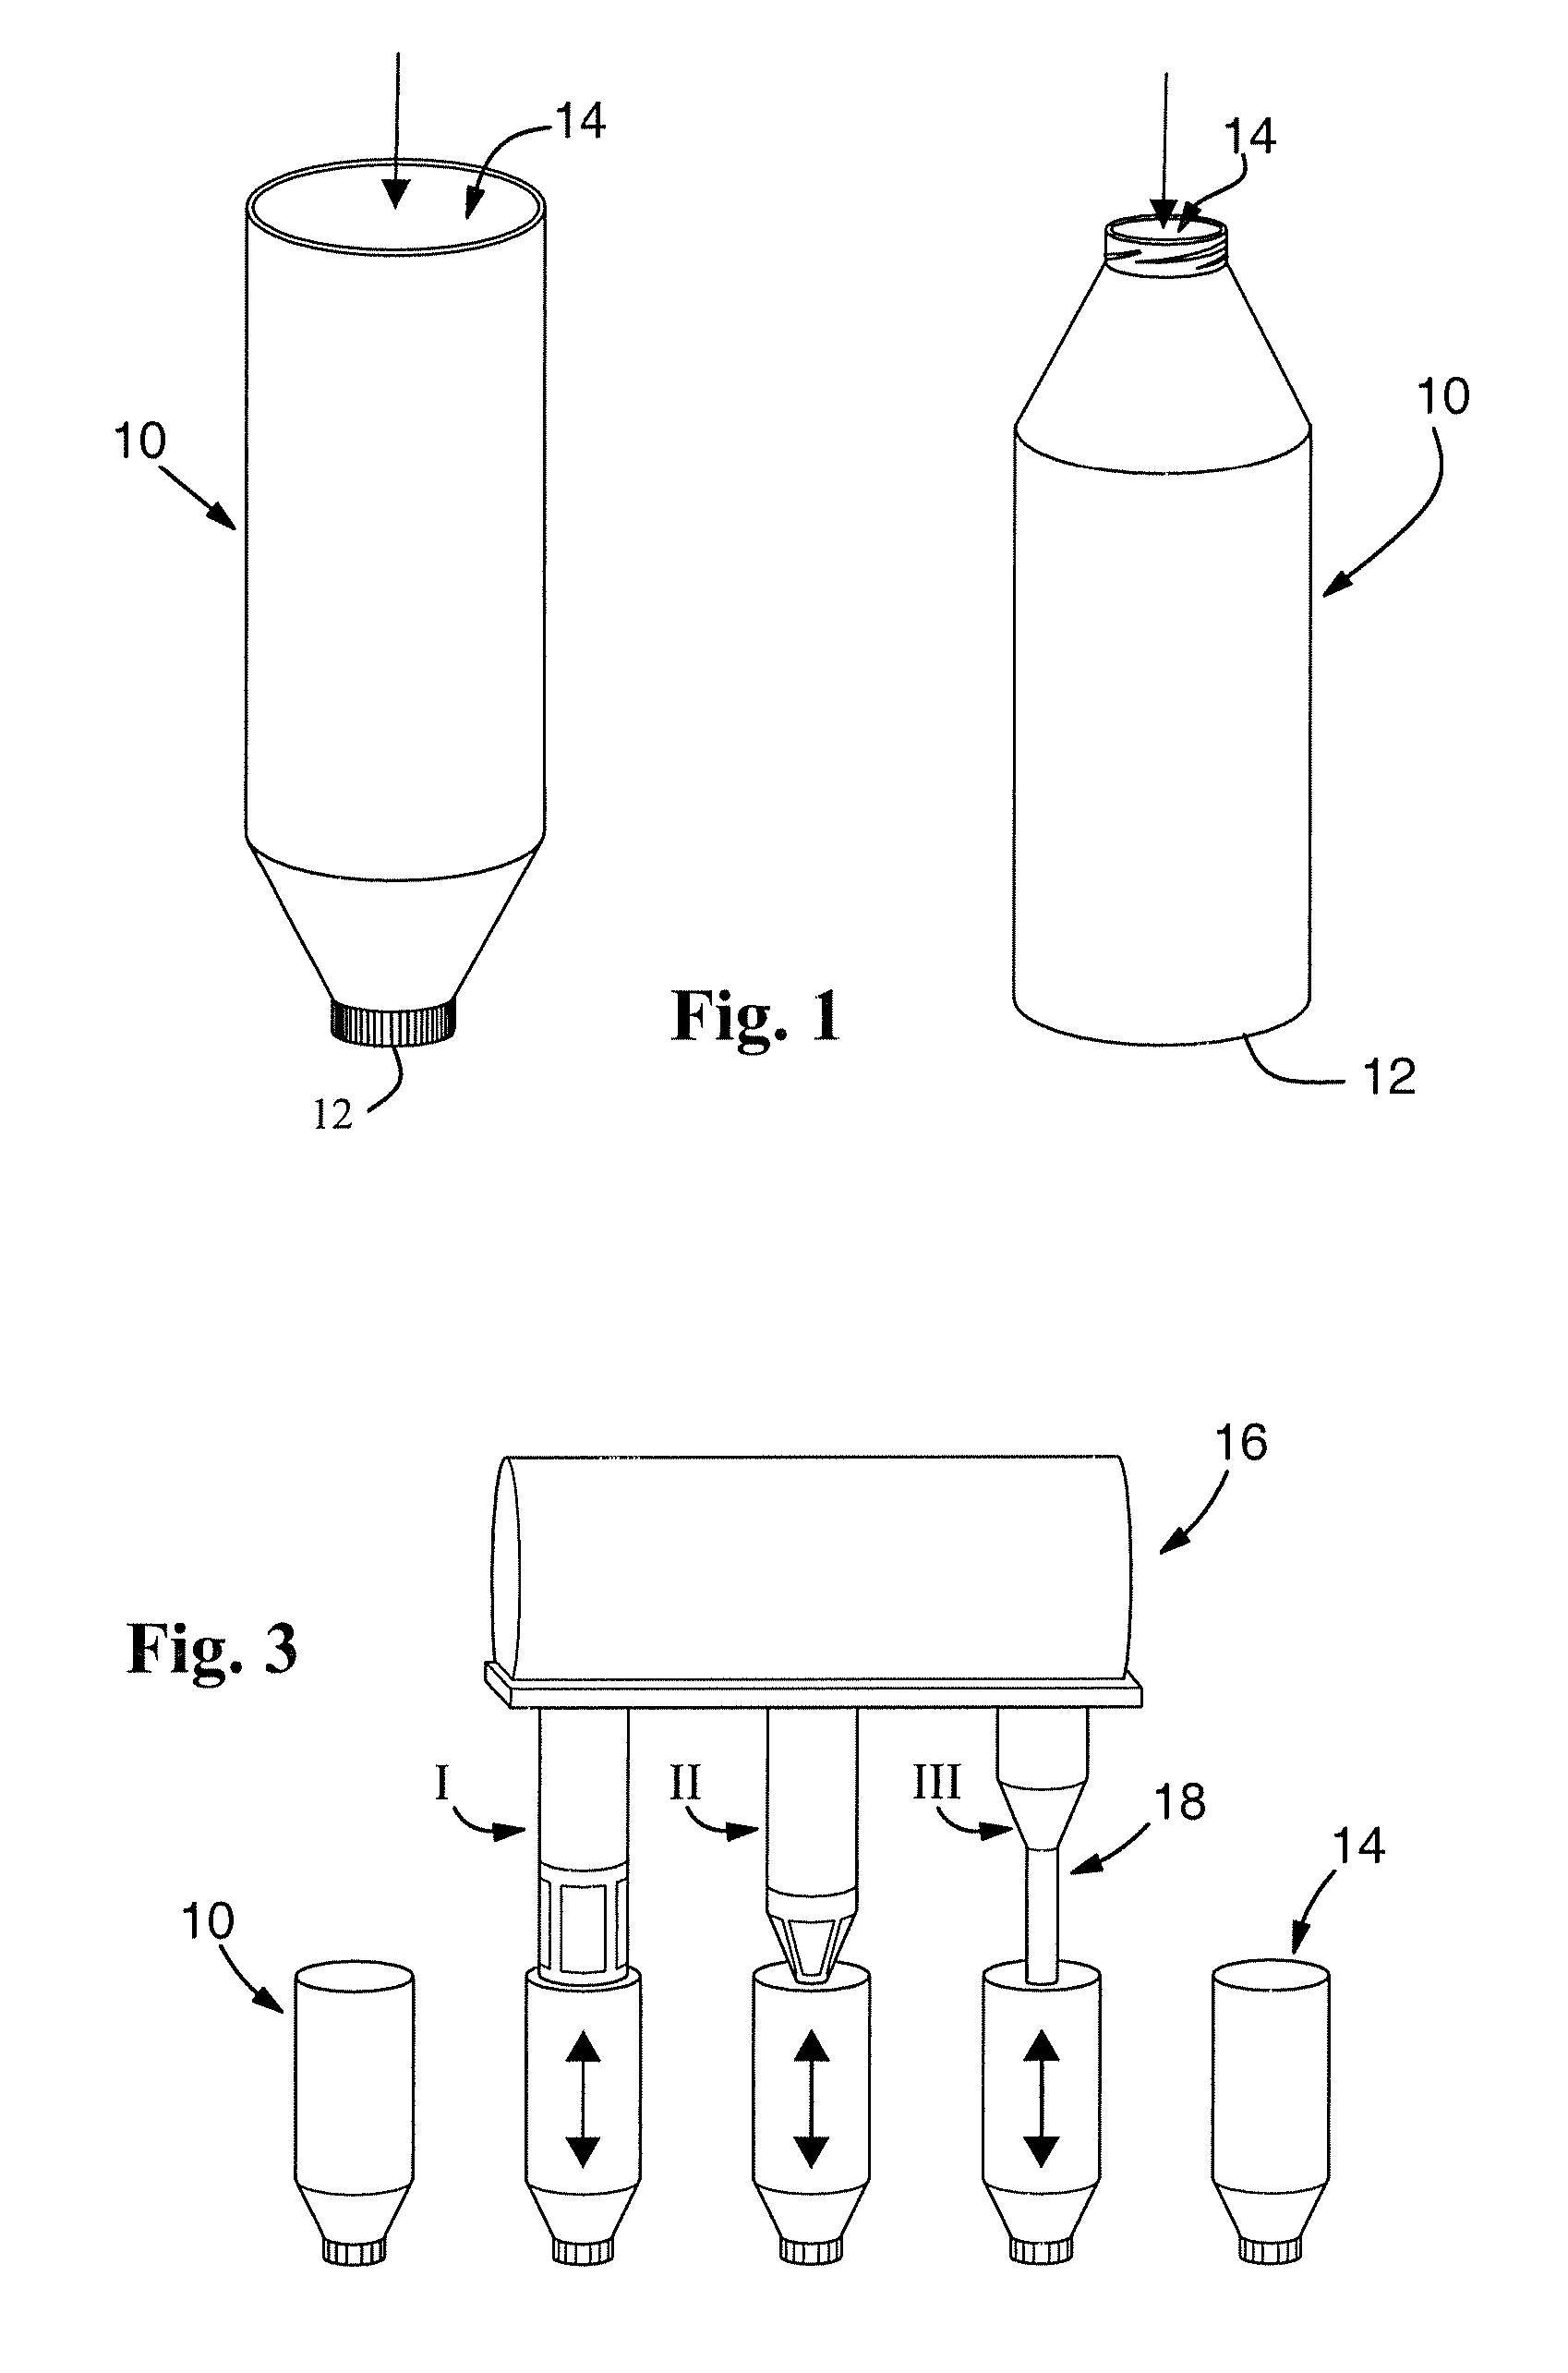 Method of sterilizing packages